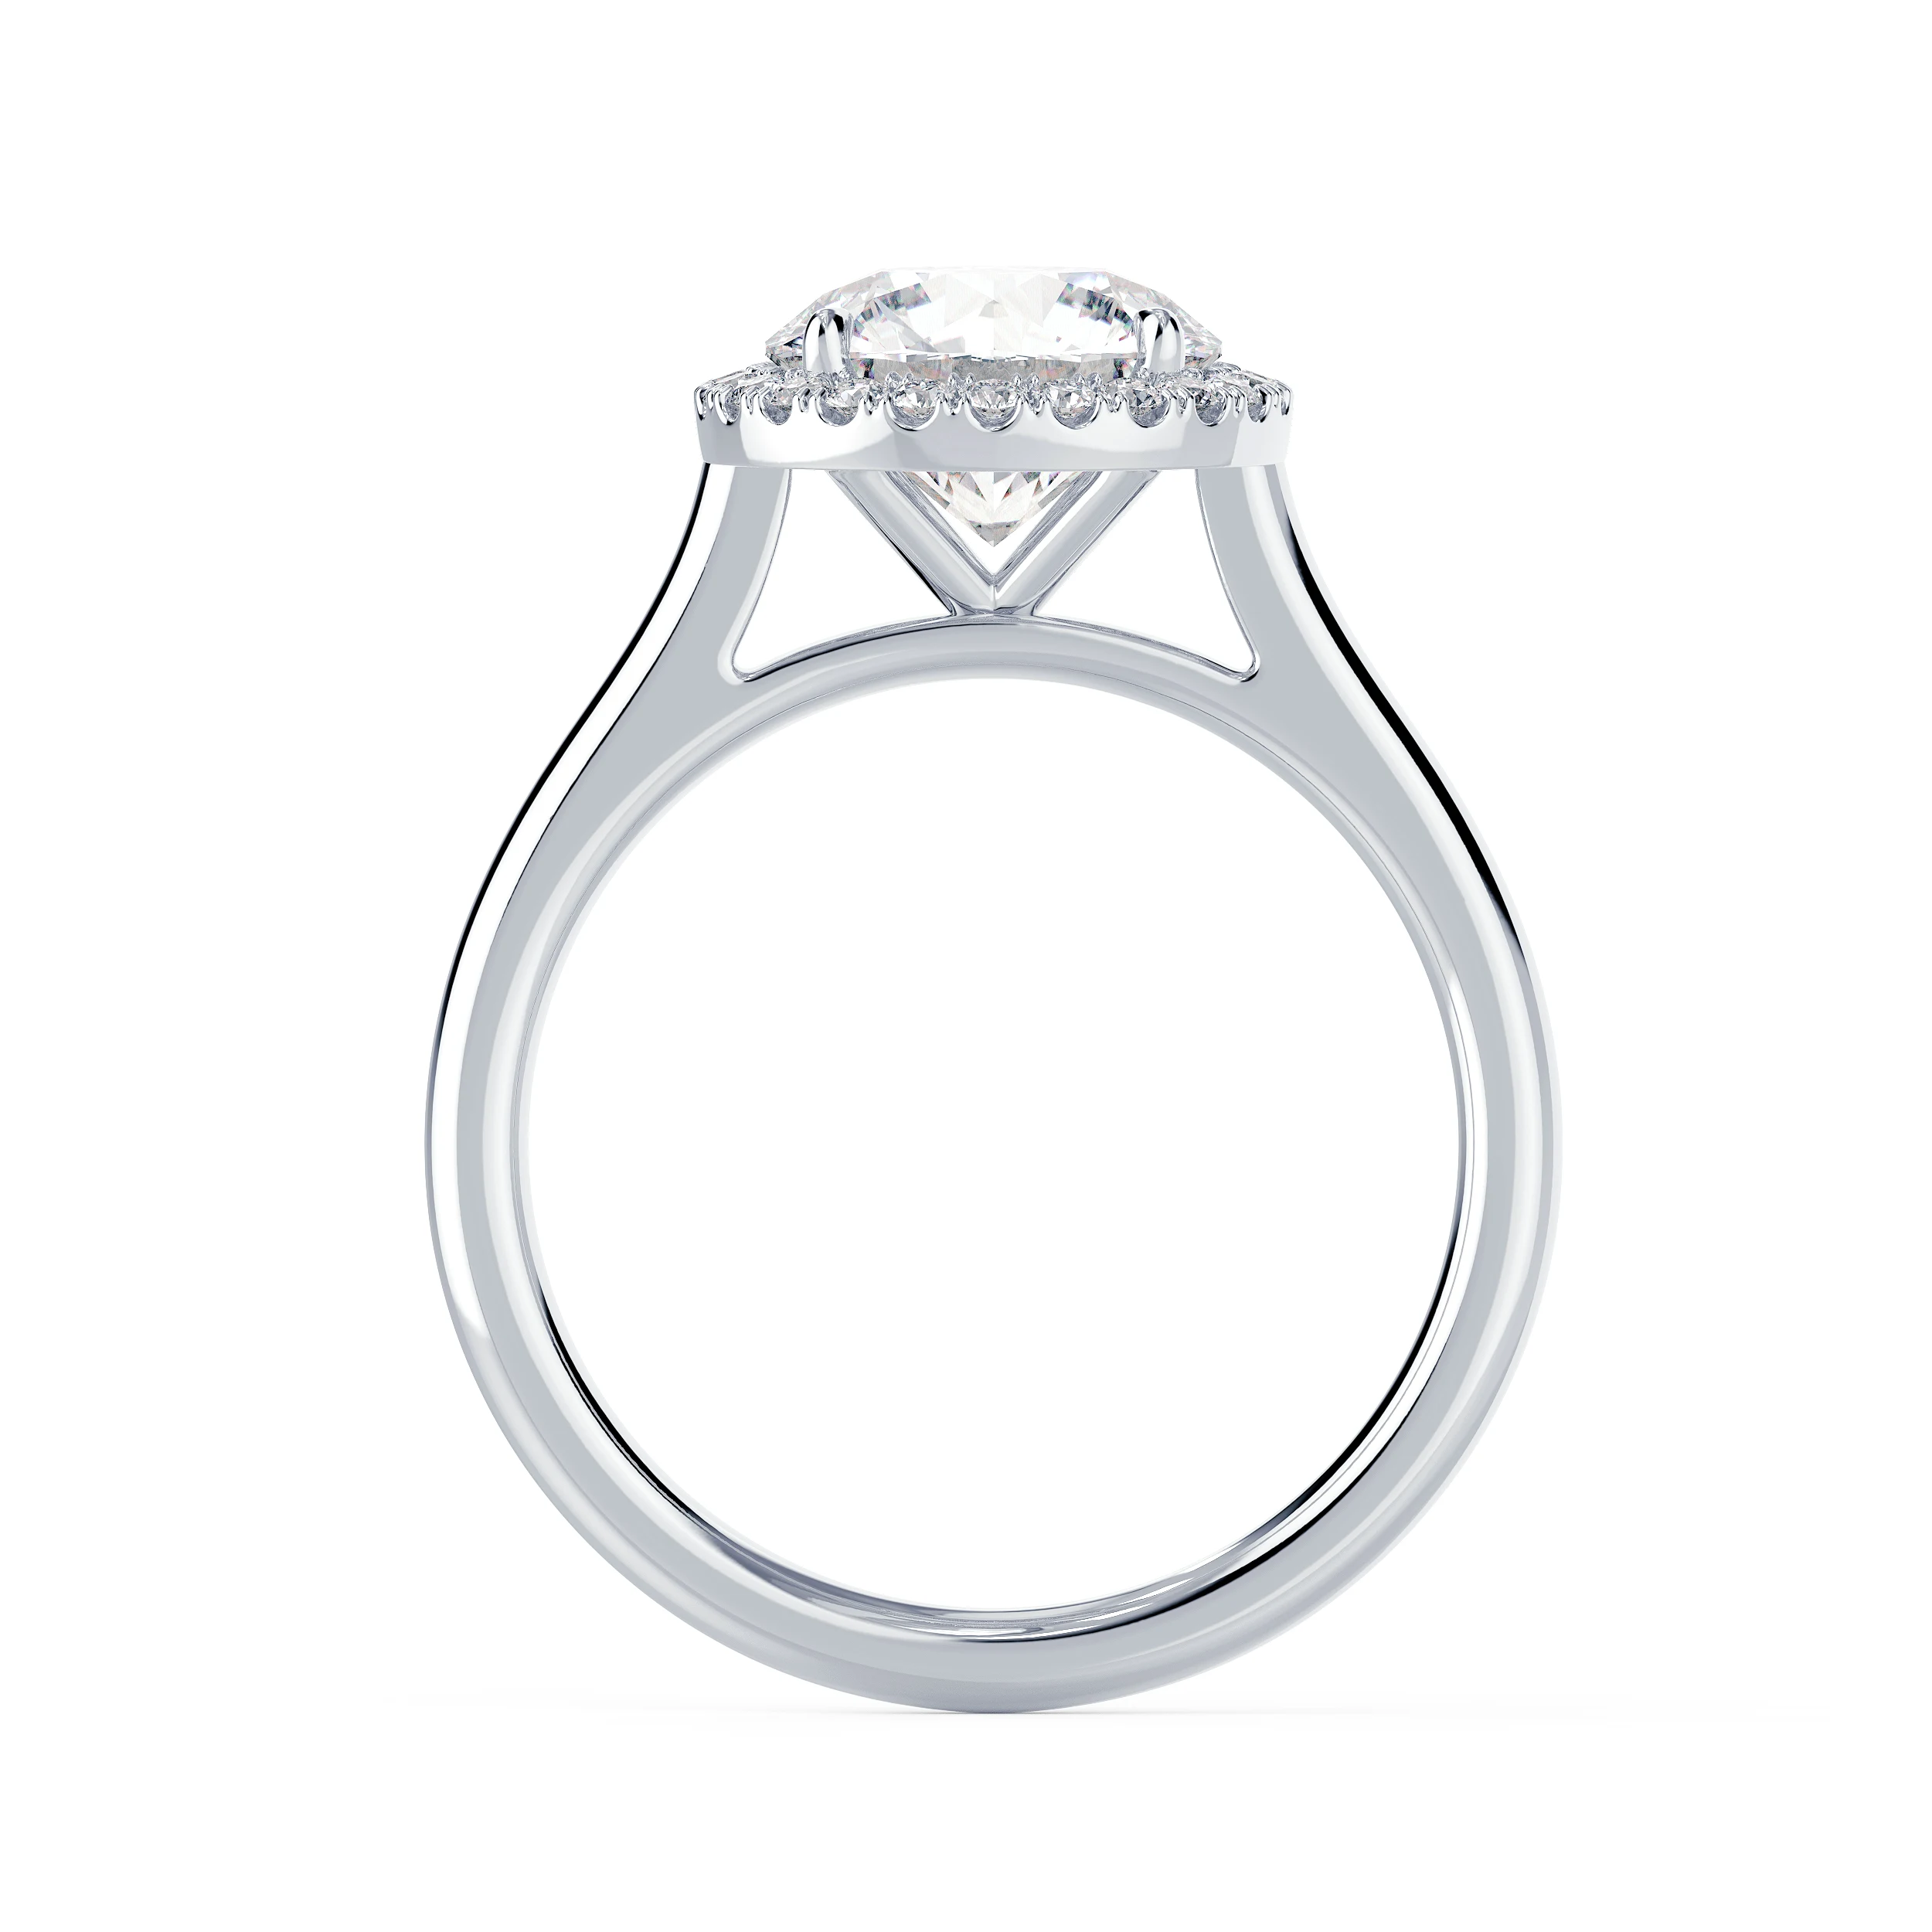 Exceptional Quality Lab Created Diamonds set in White Gold Round Single Halo Setting (Profile View)